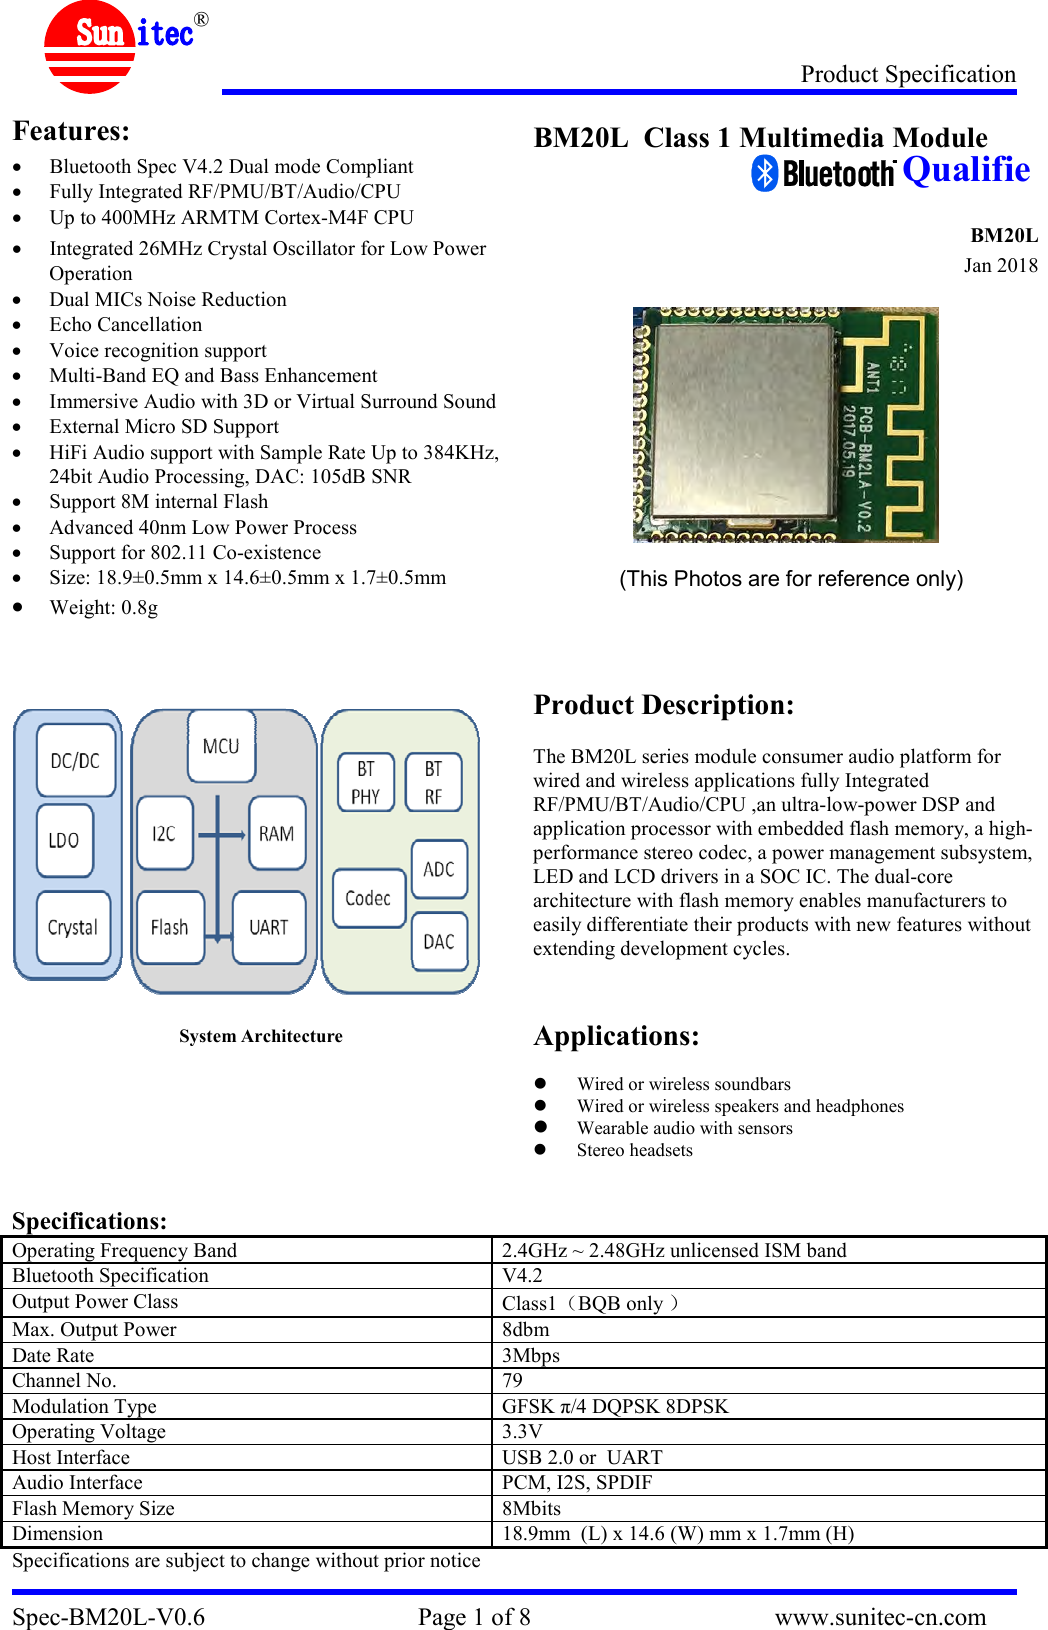 Product Specification Spec-BM20L-V0.6                                  Page 1 of 8                                       www.sunitec-cn.com  ® Features:  Bluetooth Spec V4.2 Dual mode Compliant   Fully Integrated RF/PMU/BT/Audio/CPU  Up to 400MHz ARMTM Cortex-M4F CPU  Integrated 26MHz Crystal Oscillator for Low Power Operation  Dual MICs Noise Reduction  Echo Cancellation  Voice recognition support    Multi-Band EQ and Bass Enhancement  Immersive Audio with 3D or Virtual Surround Sound  External Micro SD Support  HiFi Audio support with Sample Rate Up to 384KHz, 24bit Audio Processing, DAC: 105dB SNR  Support 8M internal Flash  Advanced 40nm Low Power Process  Support for 802.11 Co-existence  Size: 18.9±0.5mm x 14.6±0.5mm x 1.7±0.5mm     Weight: 0.8g      System Architecture  BM20L  Class 1 Multimedia Module                                                                              BM20L                            Jan 2018      (This Photos are for reference only)     Product Description:  The BM20L series module consumer audio platform for wired and wireless applications fully Integrated RF/PMU/BT/Audio/CPU ,an ultra-low-power DSP and application processor with embedded flash memory, a high-performance stereo codec, a power management subsystem, LED and LCD drivers in a SOC IC. The dual-core architecture with flash memory enables manufacturers to easily differentiate their products with new features without extending development cycles.   Applications:   Wired or wireless soundbars  Wired or wireless speakers and headphones  Wearable audio with sensors  Stereo headsets   Specifications: Operating Frequency Band  2.4GHz ~ 2.48GHz unlicensed ISM band Bluetooth Specification  V4.2 Output Power Class  Class1 BQB only   Max. Output Power  8dbm Date Rate  3Mbps Channel No.  79 Modulation Type  GFSK π/4 DQPSK 8DPSK Operating Voltage  3.3V Host Interface  USB 2.0 or  UART Audio Interface  PCM, I2S, SPDIF Flash Memory Size  8Mbits Dimension  18.9mm  (L) x 14.6 (W) mm x 1.7mm (H) Specifications are subject to change without prior notice  Qualifie